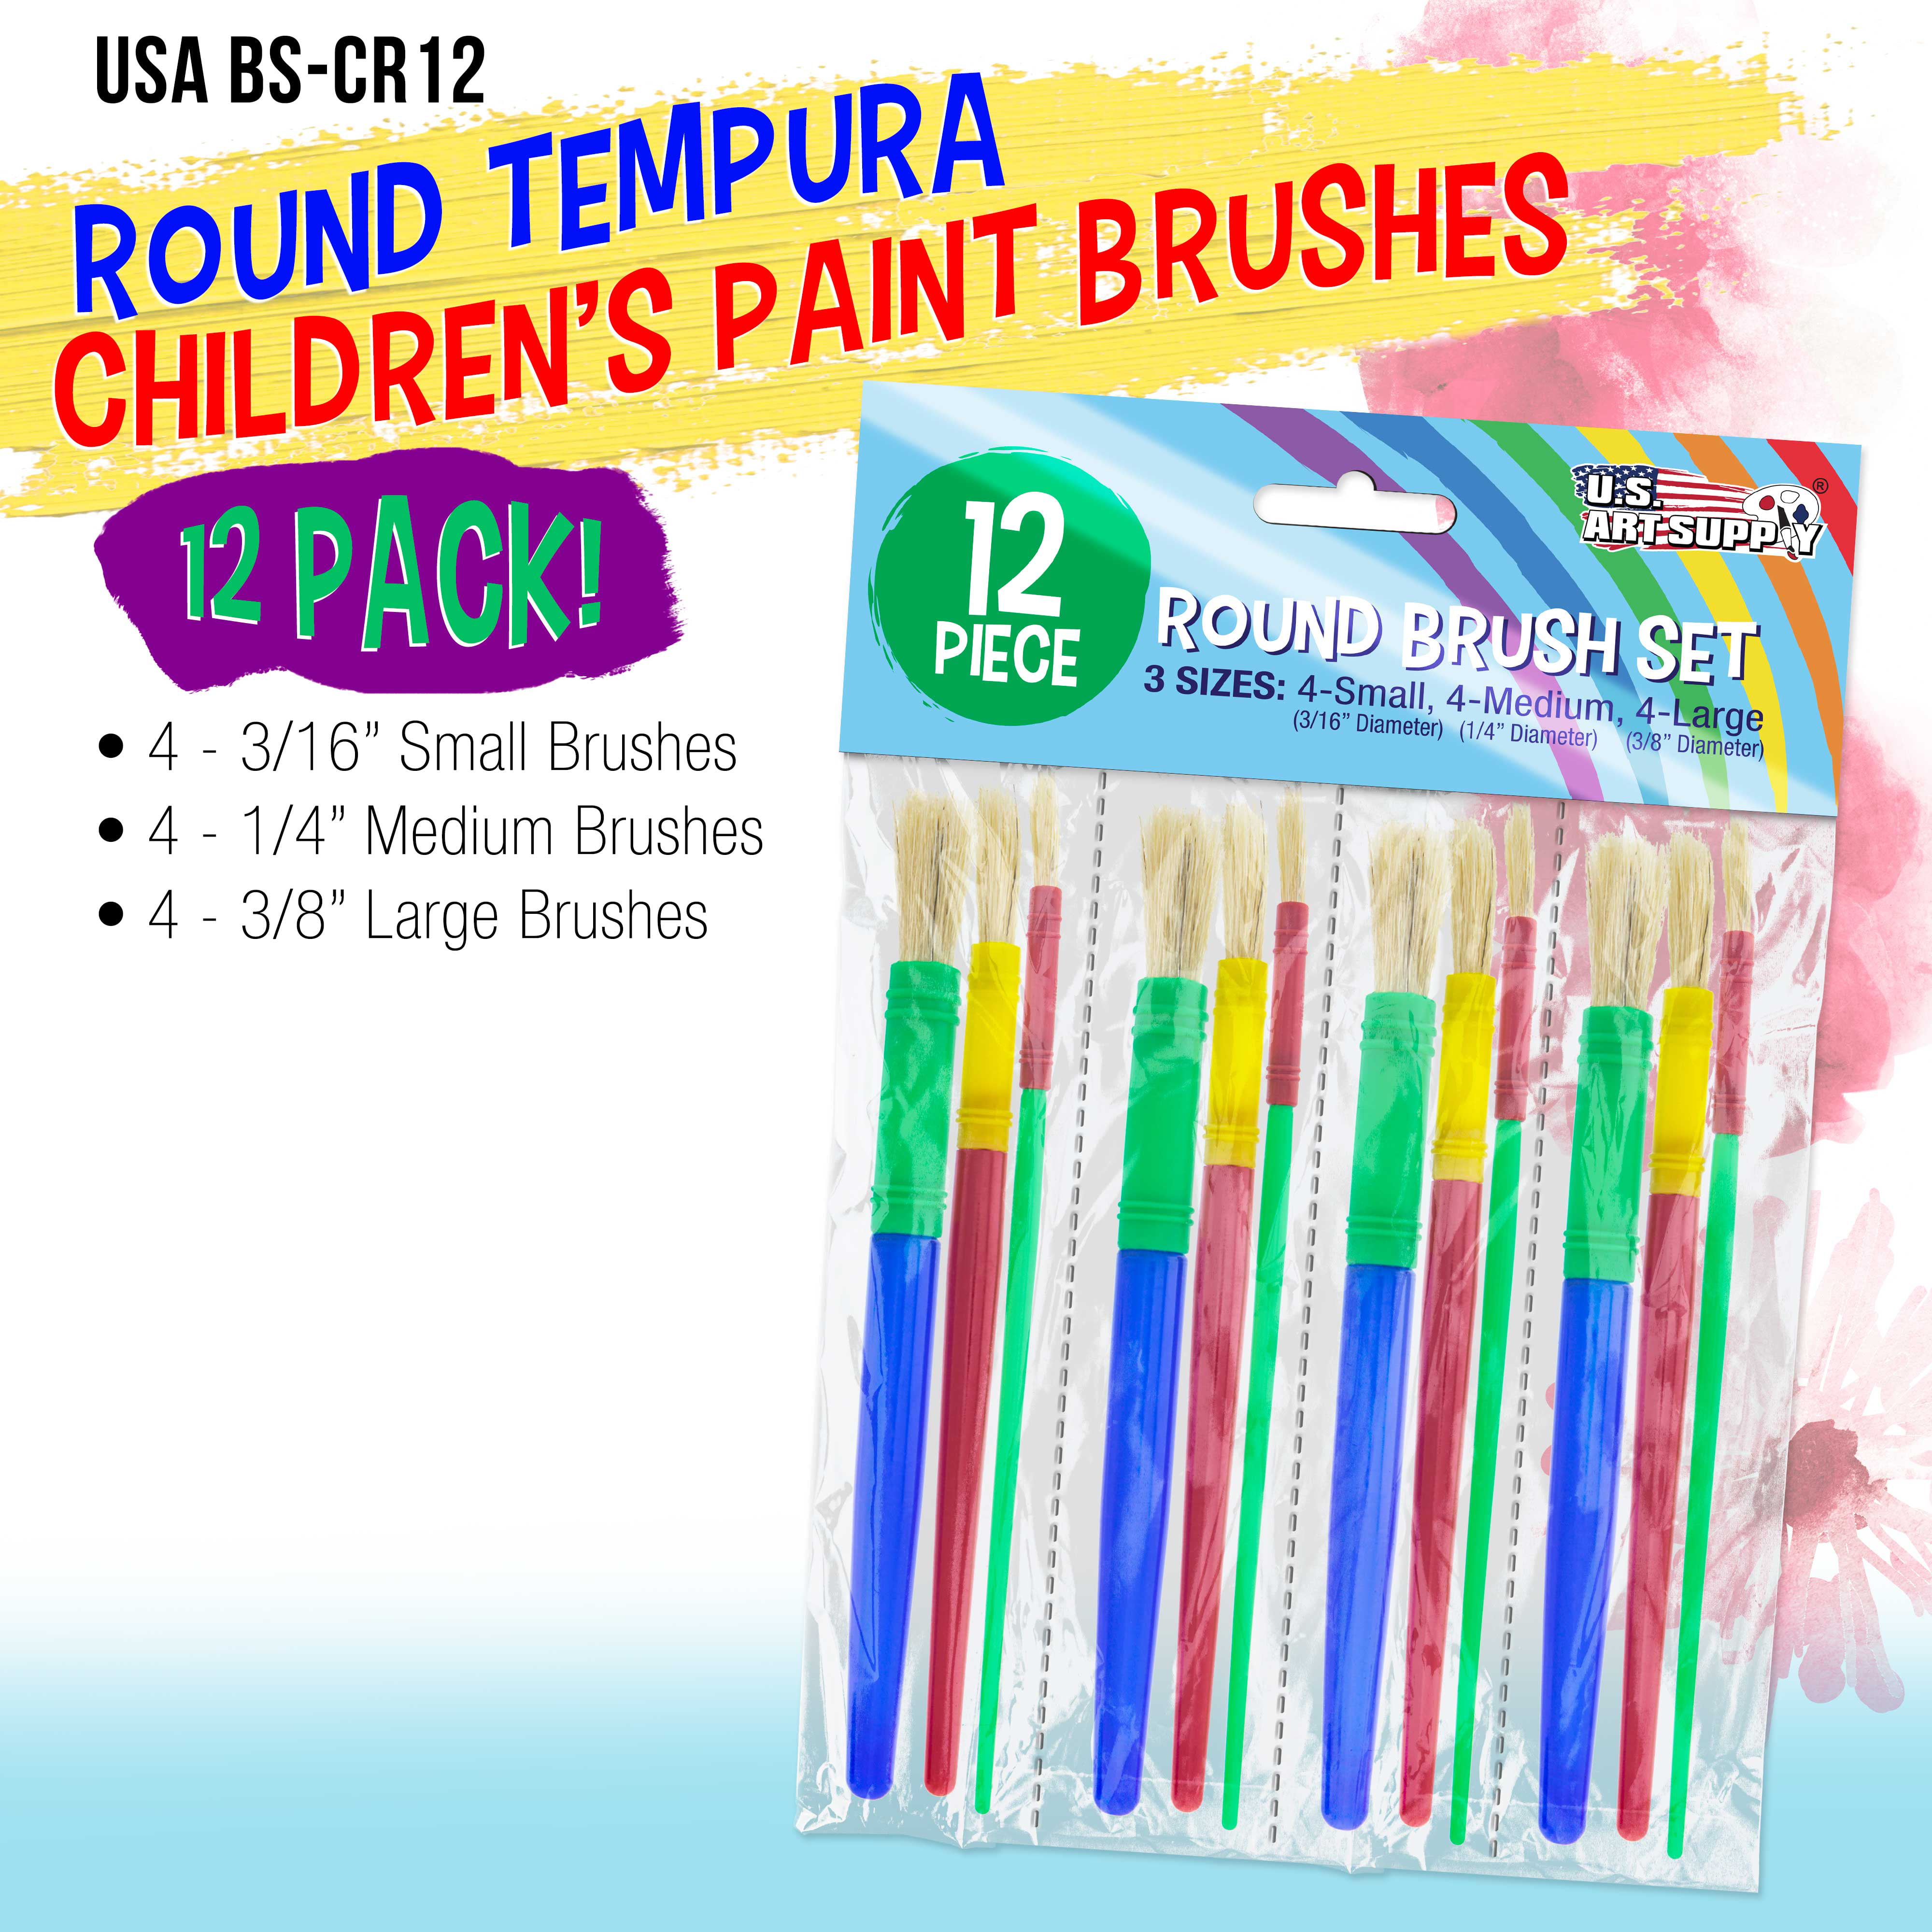 MICADOR JR. - FUTURE KID PAINT BRUSHES - 4 PACK - The Stationery